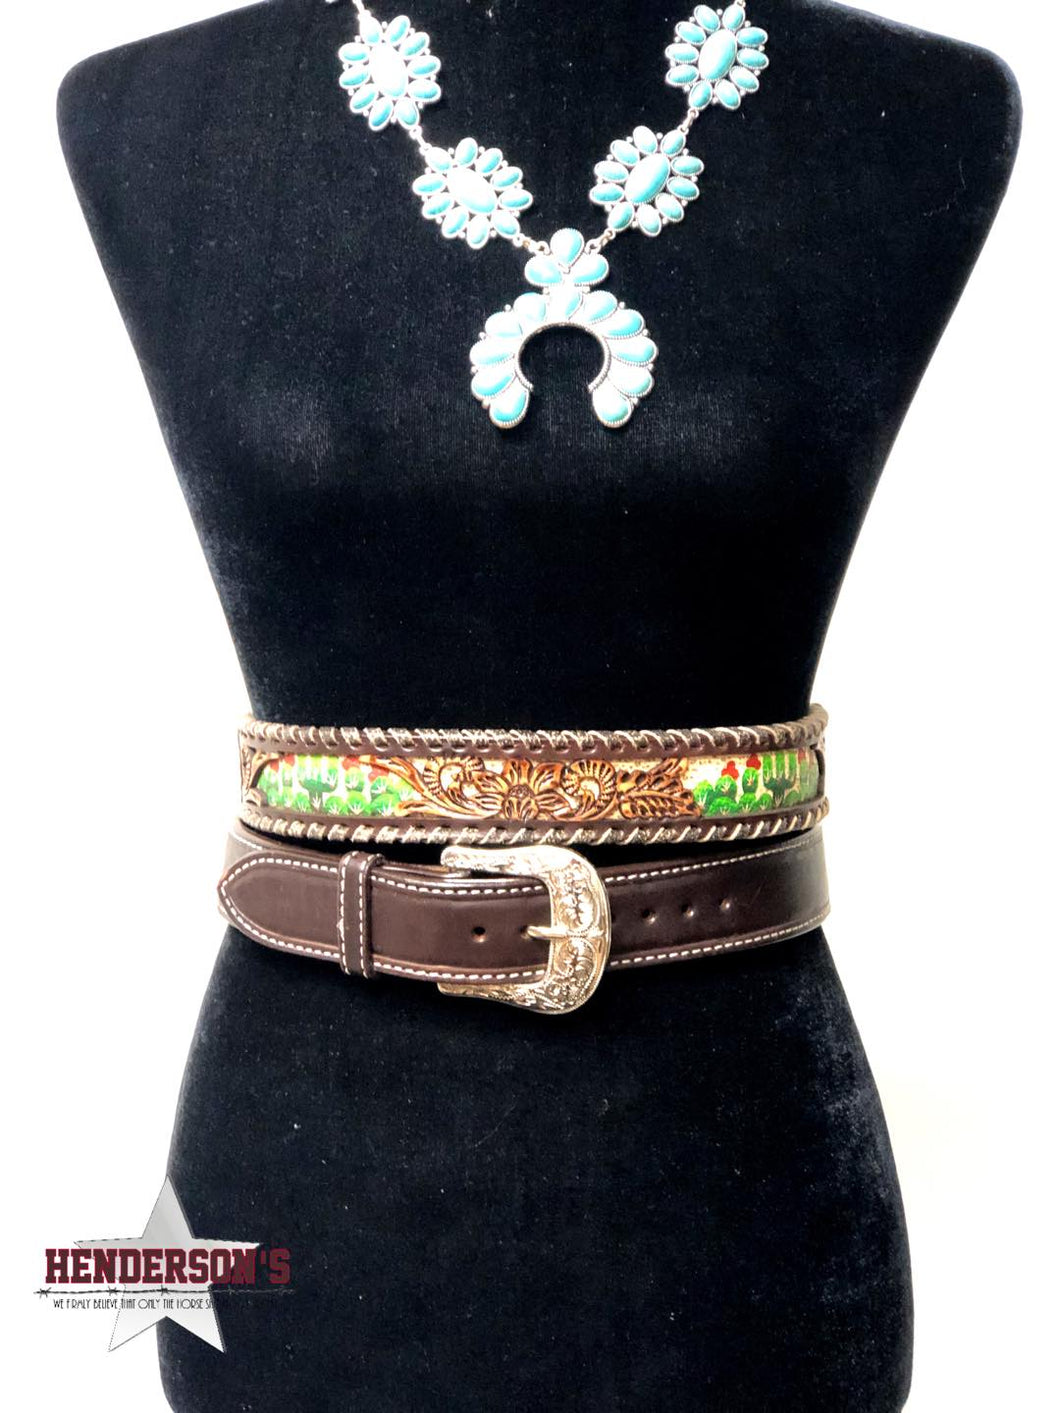 Cactus Country Belt by Circle Y Women's Belt Henderson's Western Store   